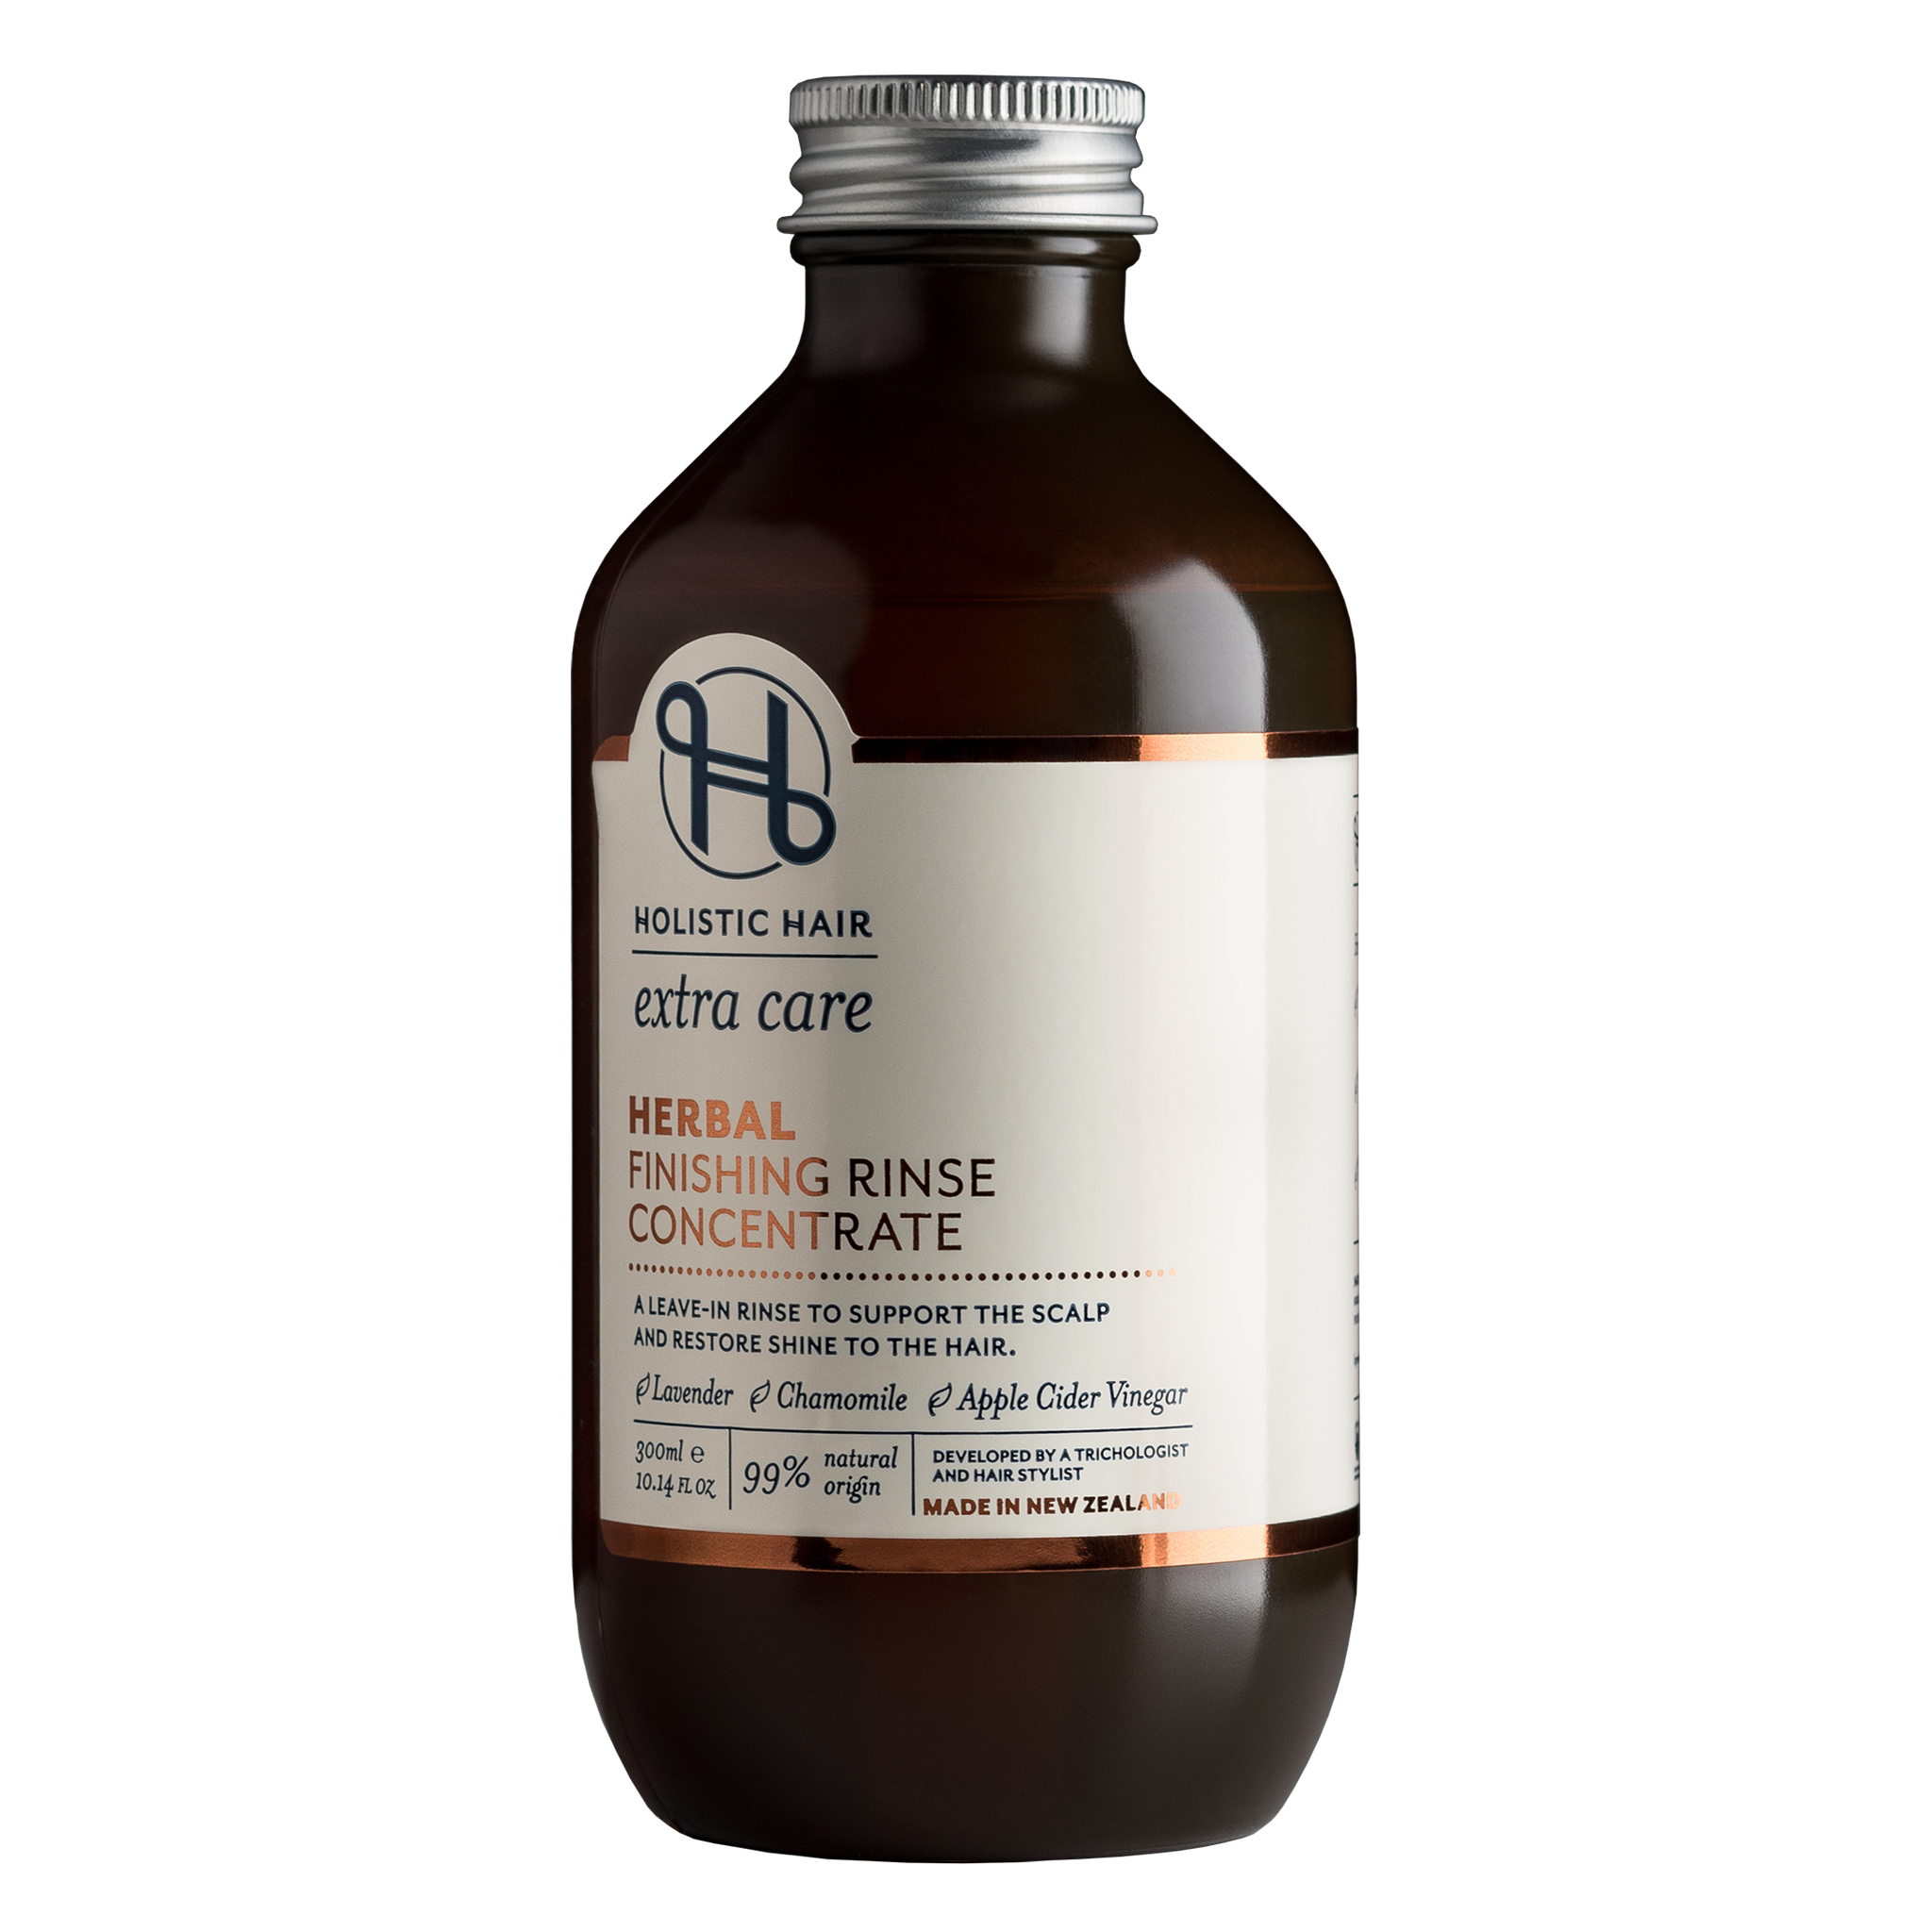 Holistic Hair Herbal Finishing Rinse Concentrate 300ml